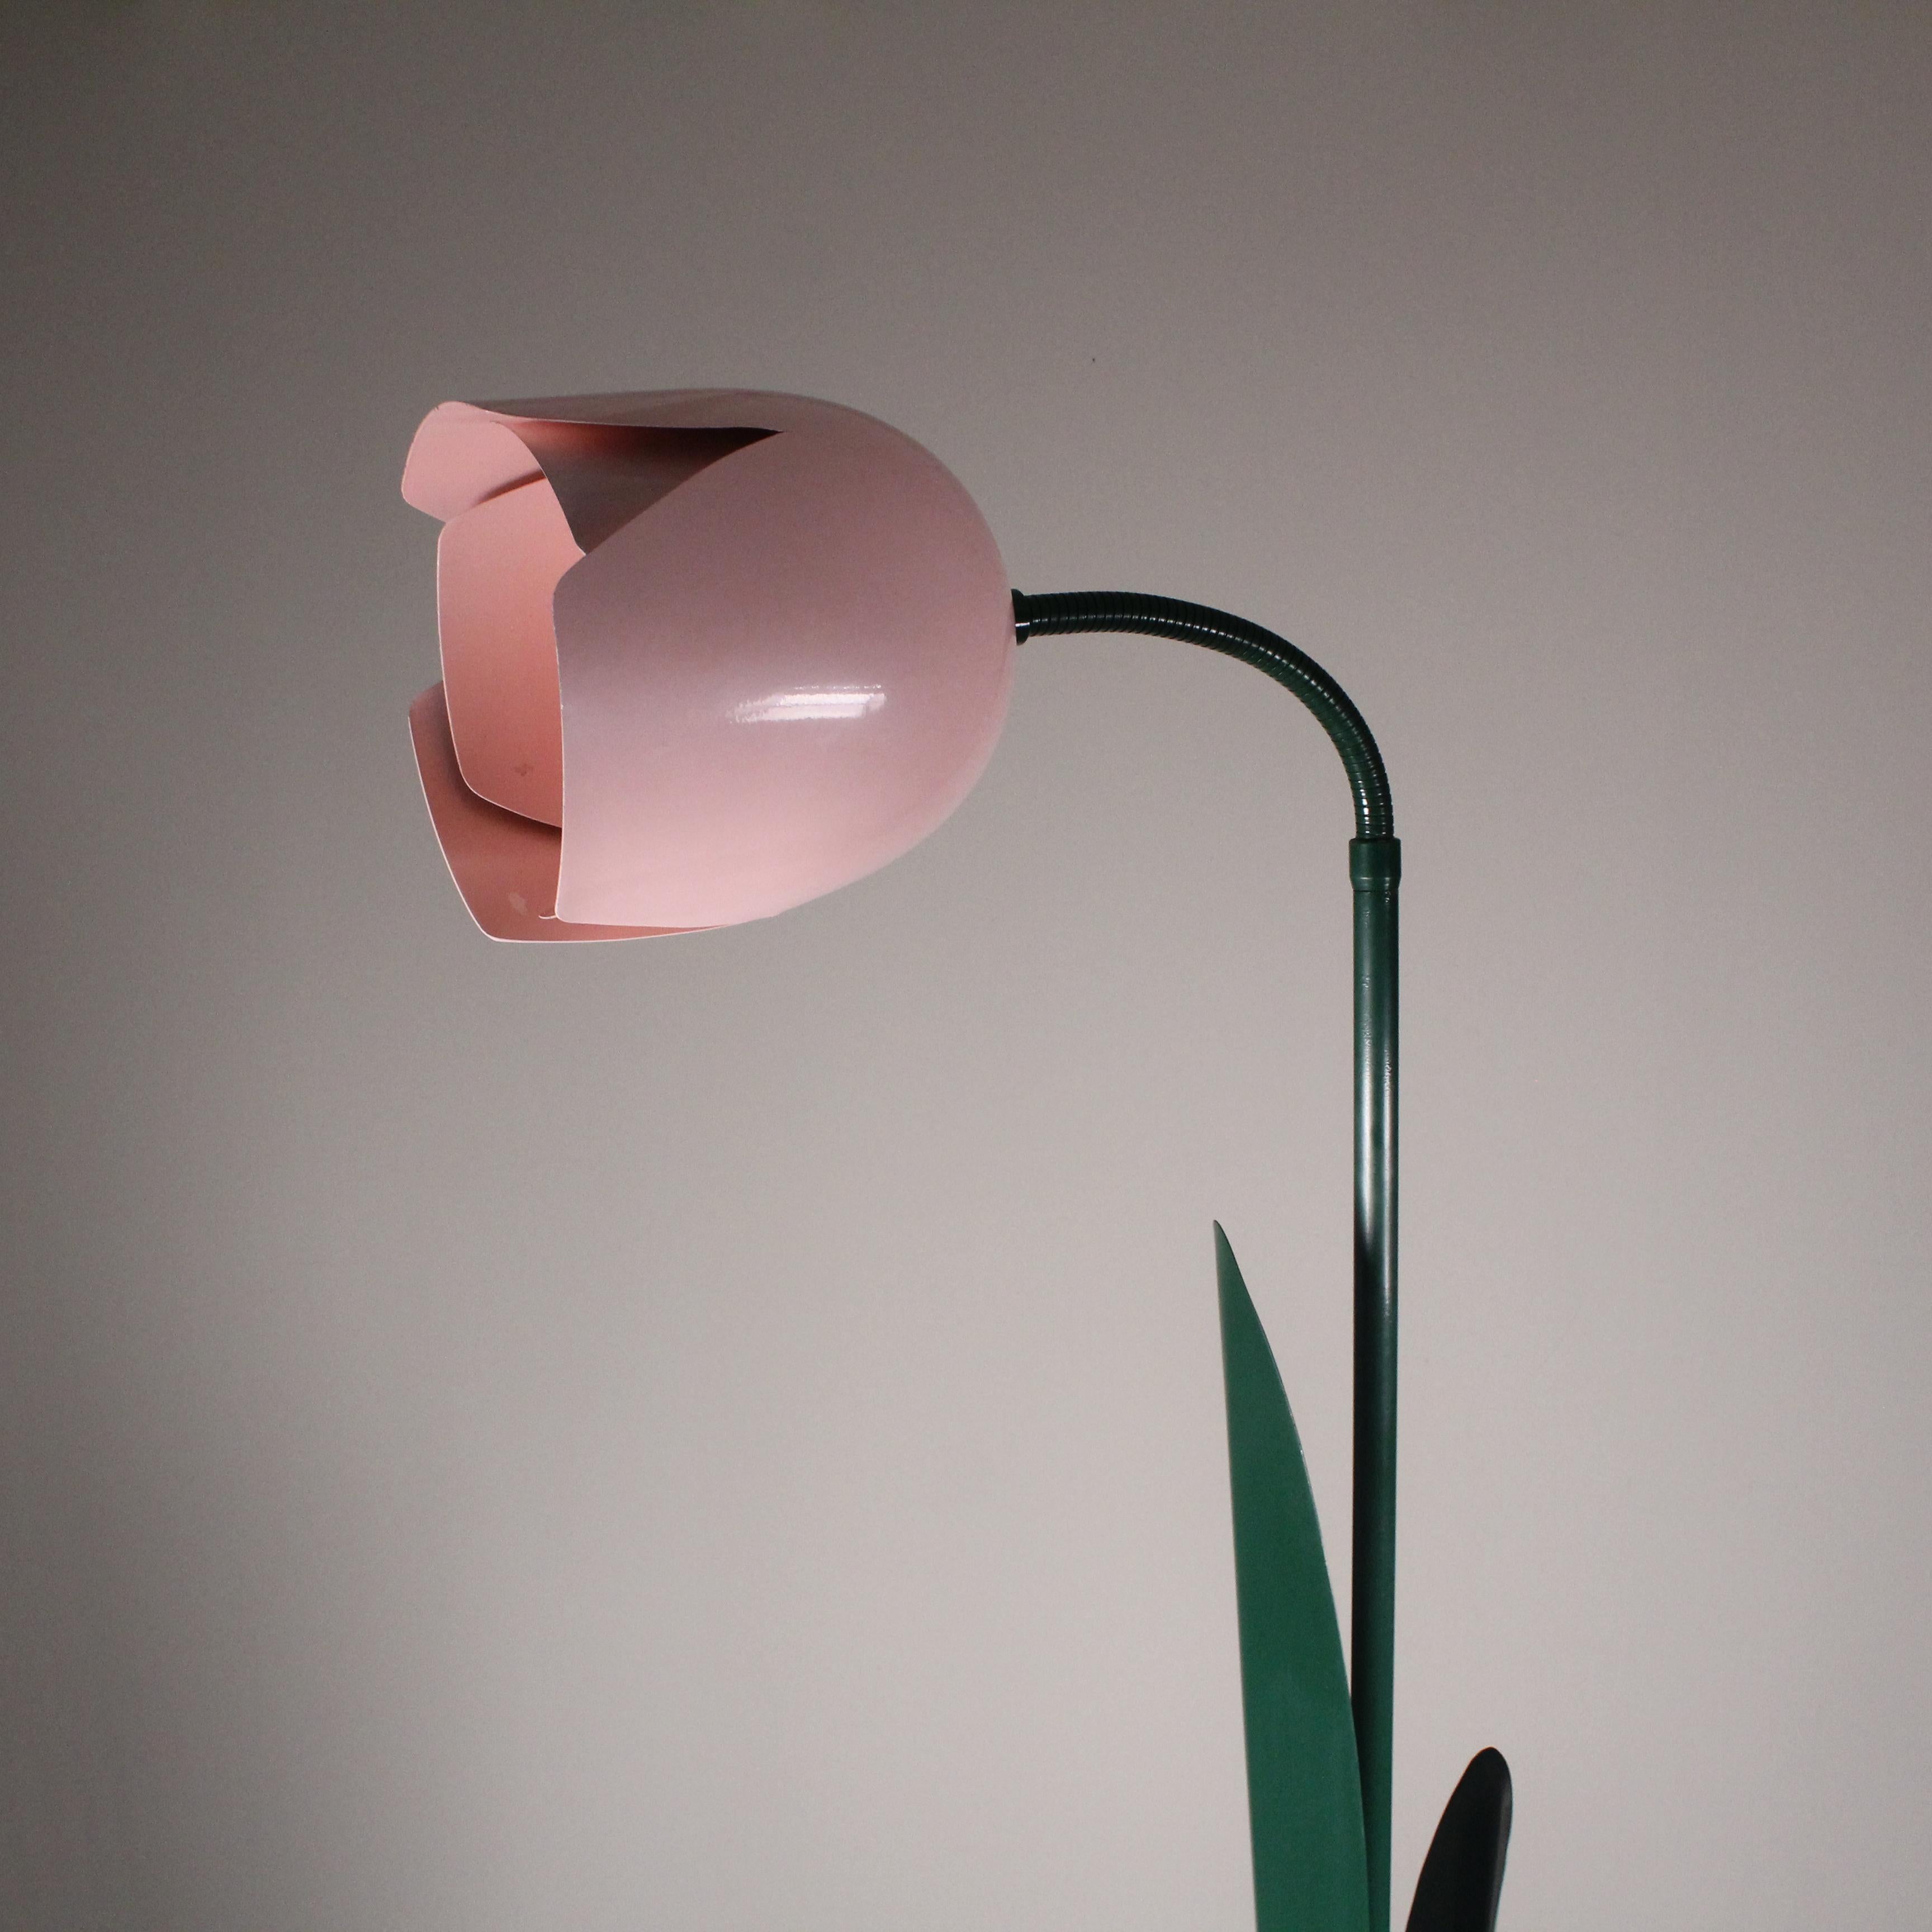 Peter Bliss' rare Tulip Lamp embodies an extraordinary harmony between form and function. An icon of postmodern design, this lamp exudes elegance and originality. Its flowing, organic lines recall nature, while its bold use of color and materials